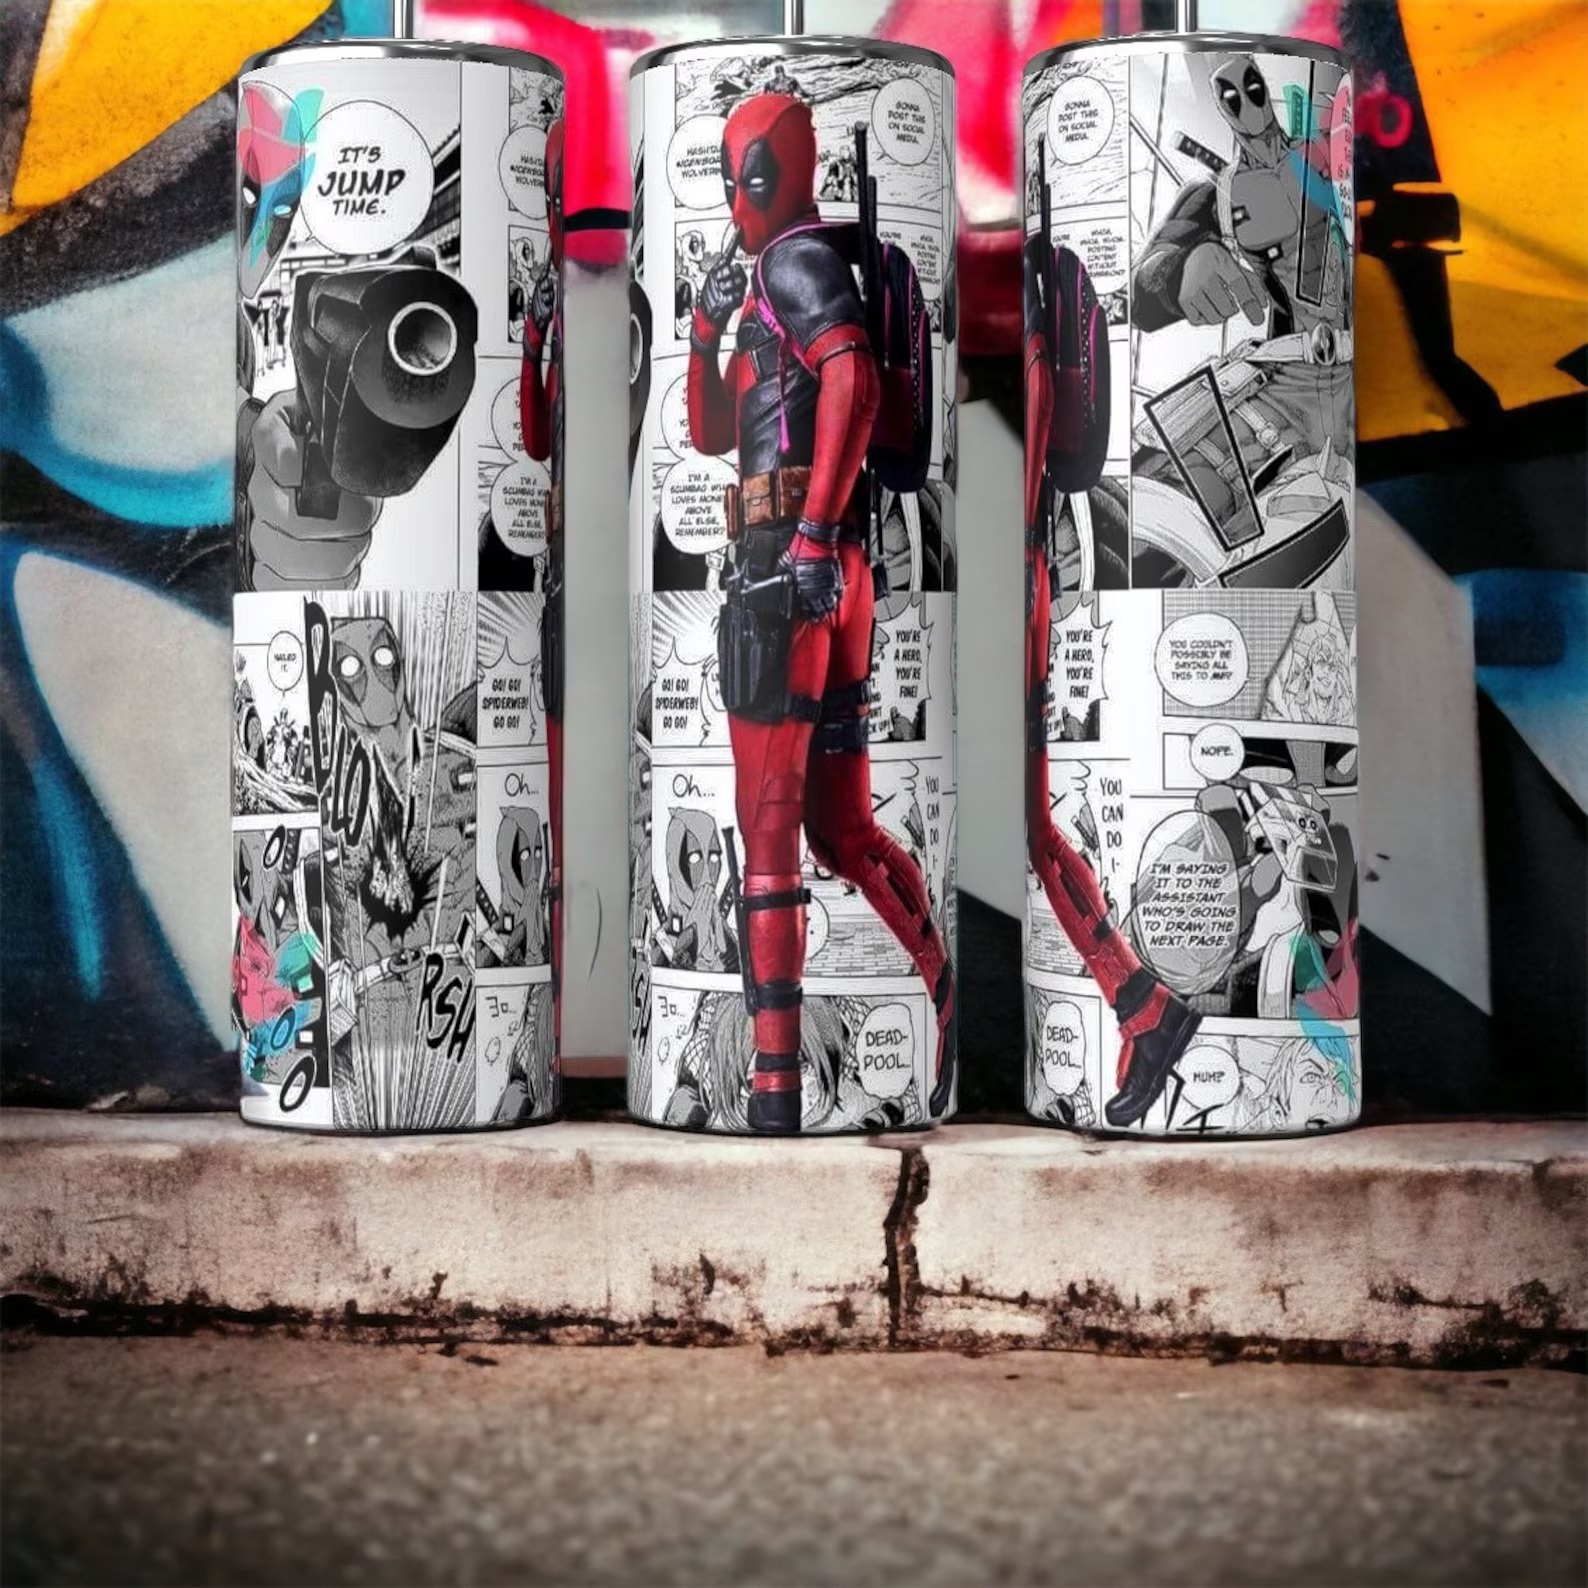 Three different angles of a tumbler featuring a full-color image of Ryan Reynold's Deadpool against a backdrop of black-and-white comic book panels